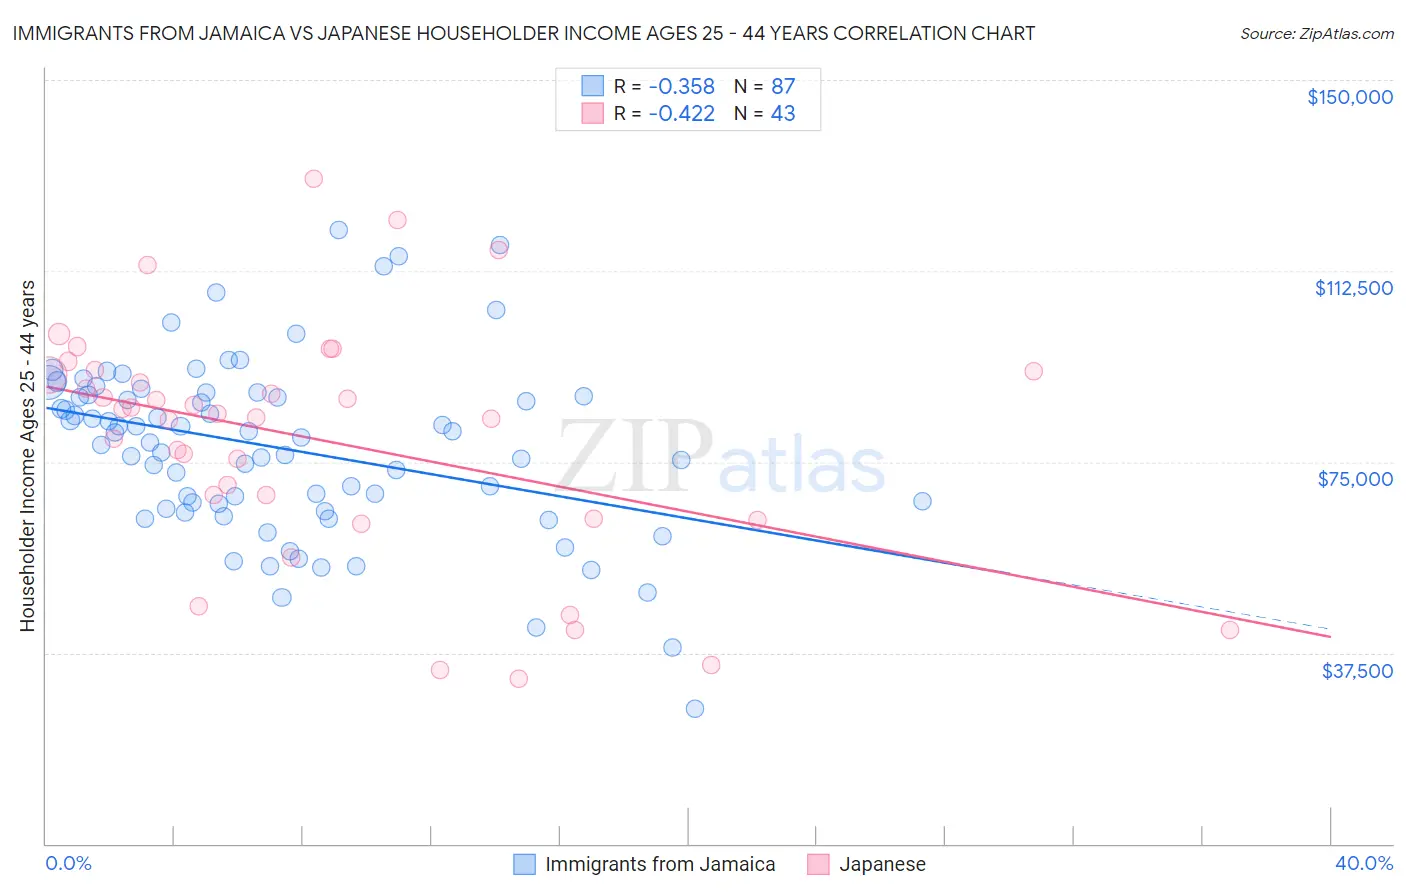 Immigrants from Jamaica vs Japanese Householder Income Ages 25 - 44 years